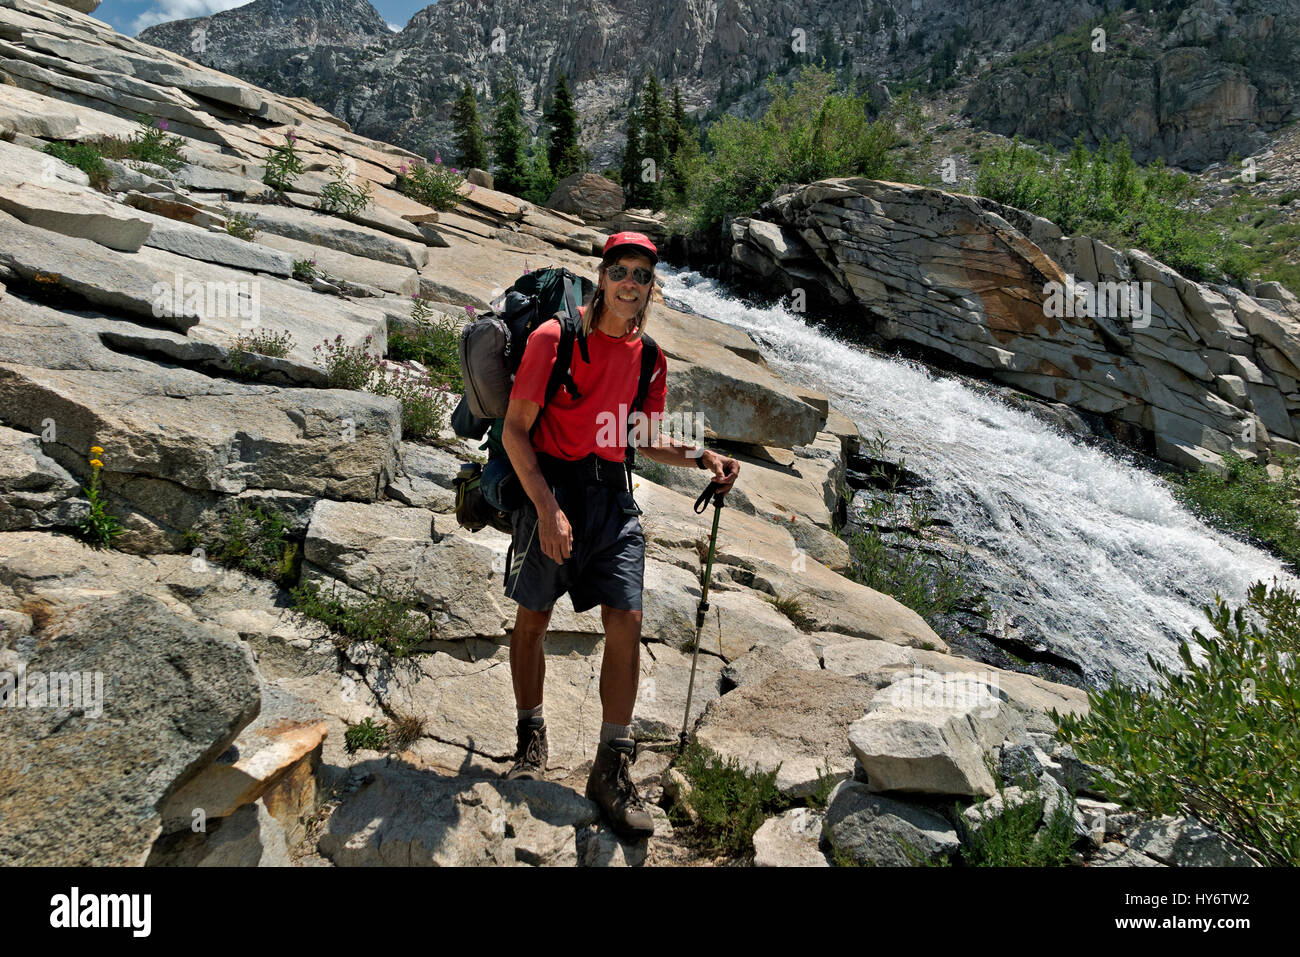 CA03157-00...CALIFORNIA - Hiker on the combined PCT/JMT near a cascade on Palisade Creek in the Sequoia and Kings Canyon Wilderness. Stock Photo